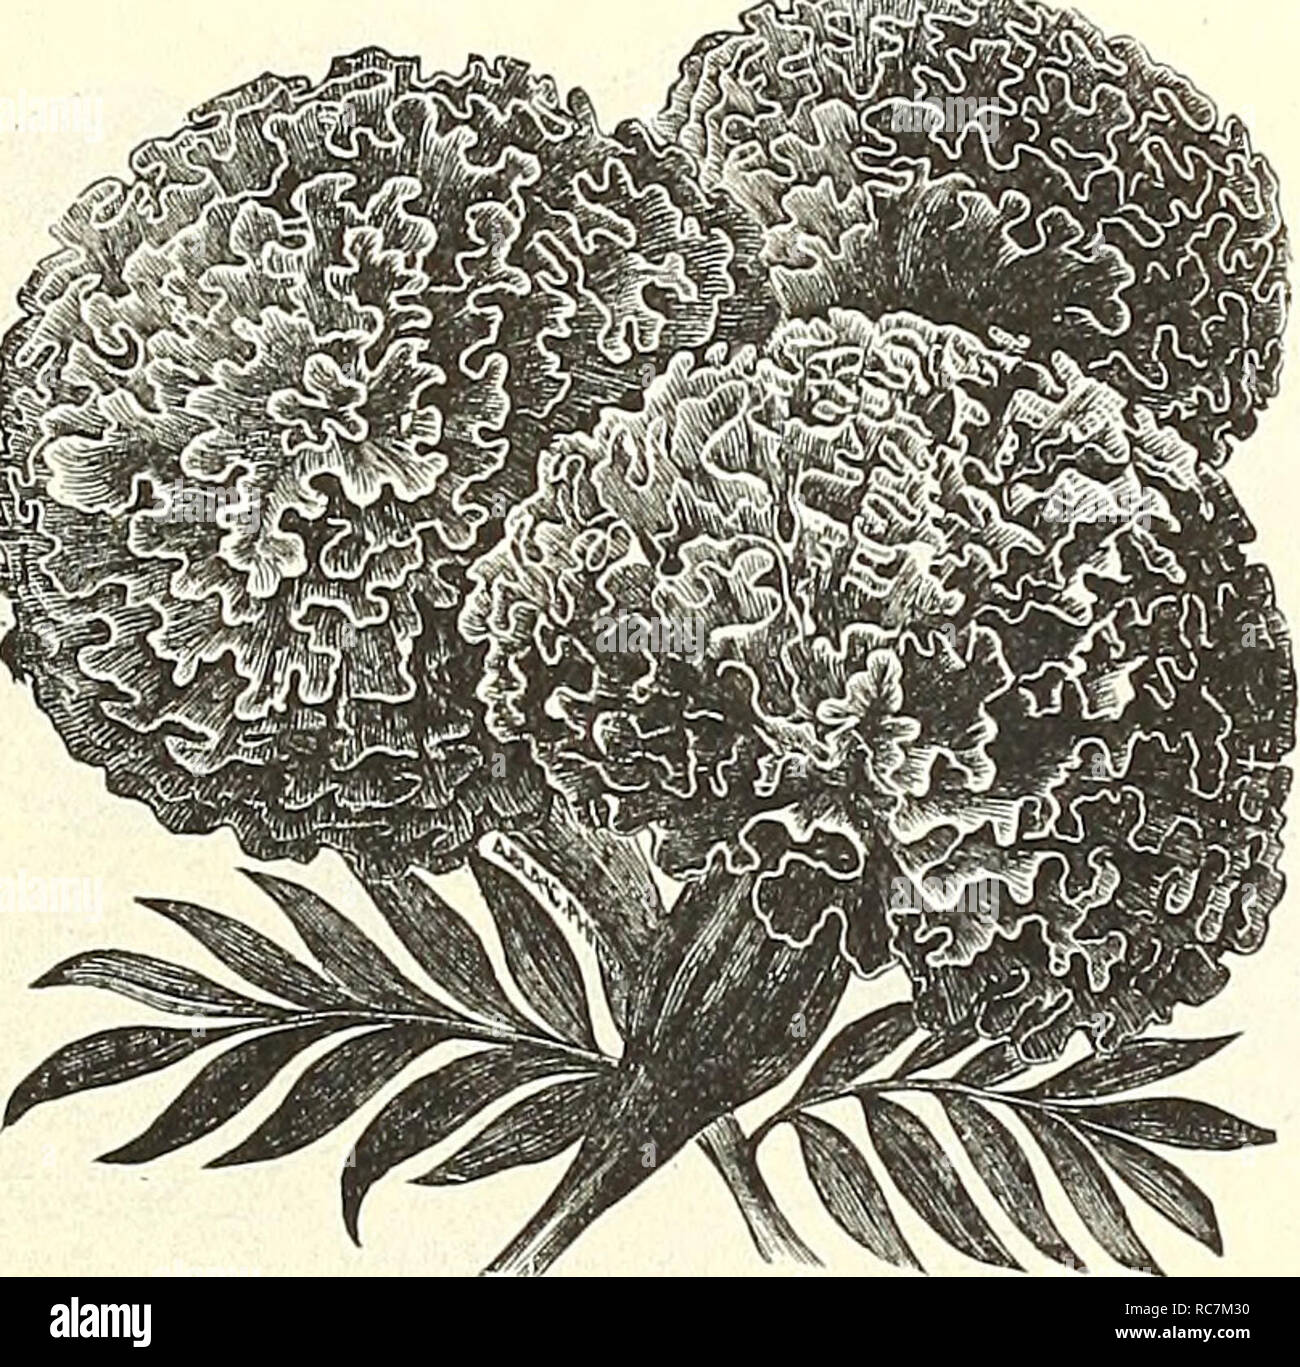 . Dreer's garden calendar : 1903. Seeds Catalogs; Nursery stock Catalogs; Gardening Equipment and supplies Catalogs; Flowers Seeds Catalogs; Vegetables Seeds Catalogs; Fruit Seeds Catalogs. Kenilworth Ivy (Linaria). LOPHOSPERMUM. 3041 Scandens. Highly ornamental annual climber, rosy-purple foxglove-like flowers; 10 feet /ith showy, 10 Marigold, Leg EUPINUS. , 3050 Mixed Annual. Ornamental free-flowering, easily-grown *^3||^lSSj2v^»r*' annual, with long, graceful spikes of rich and various colored pea- 5'^-7^'V^i^1'1-* shaped flowers; valuable for mixed flower borders and beds; 2 feet. Per oz. Stock Photo